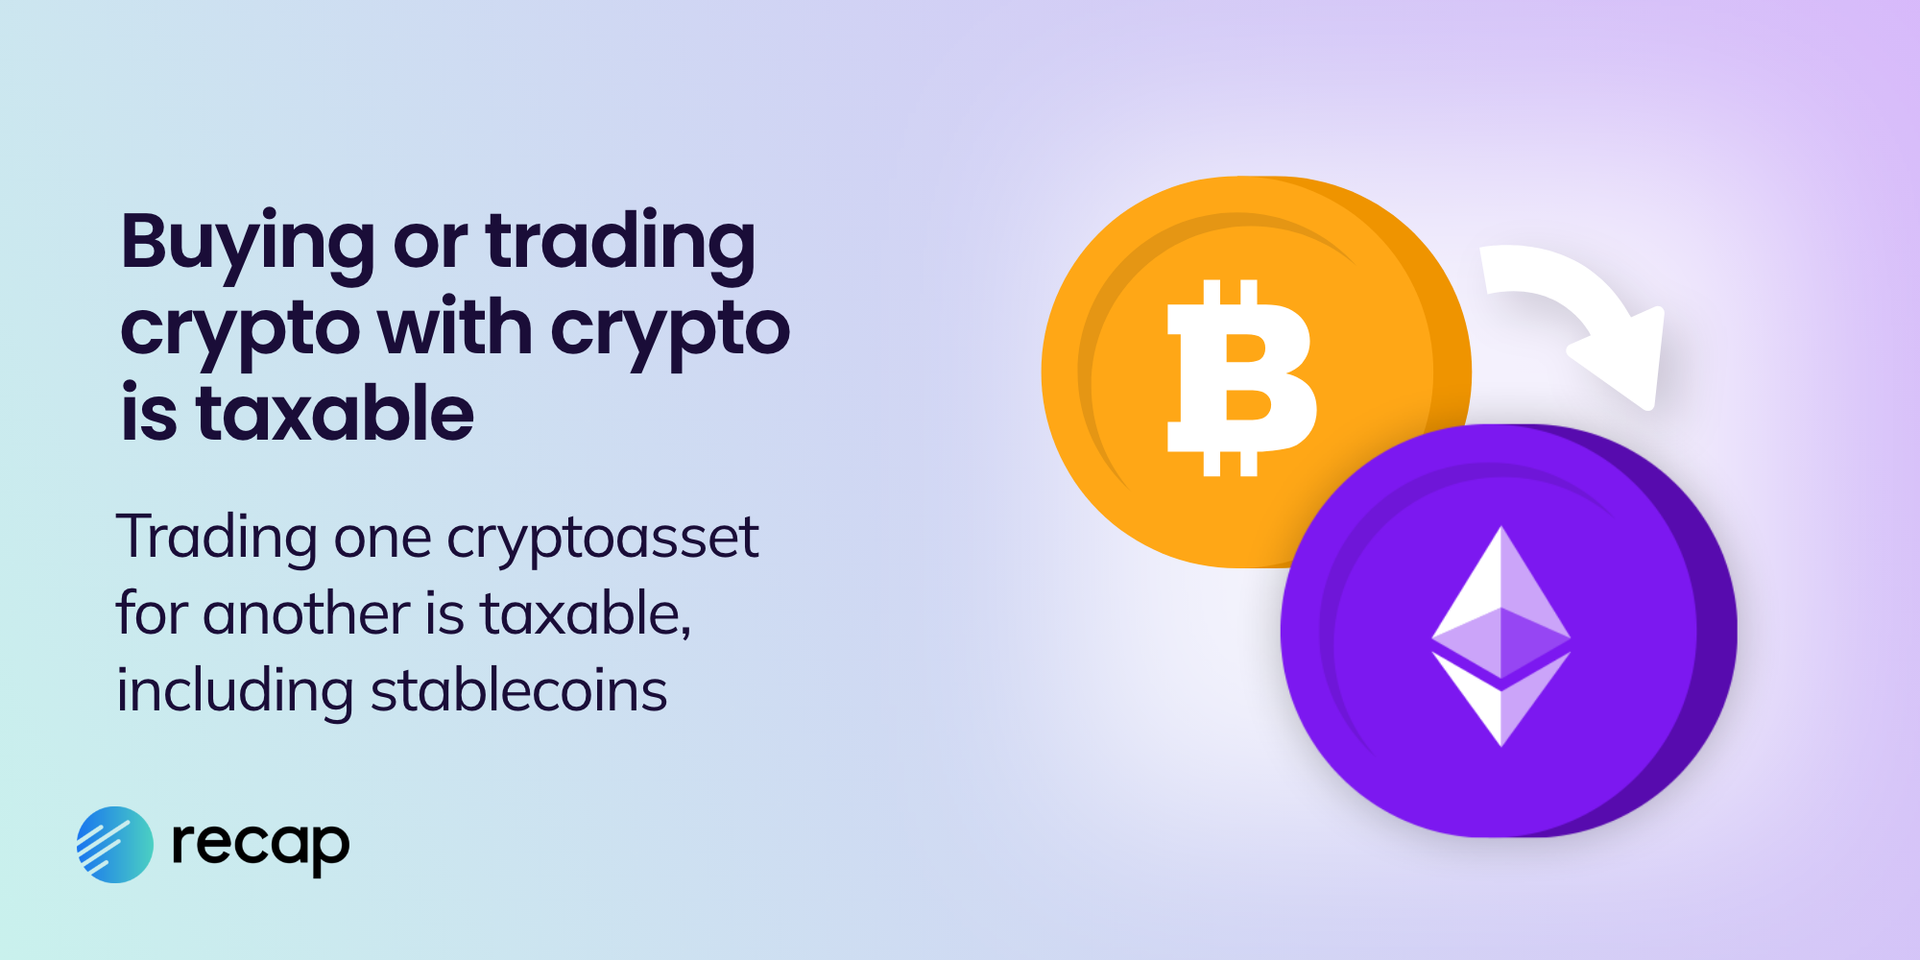 Illustration stating that buying or trading crypto with crypto is taxable